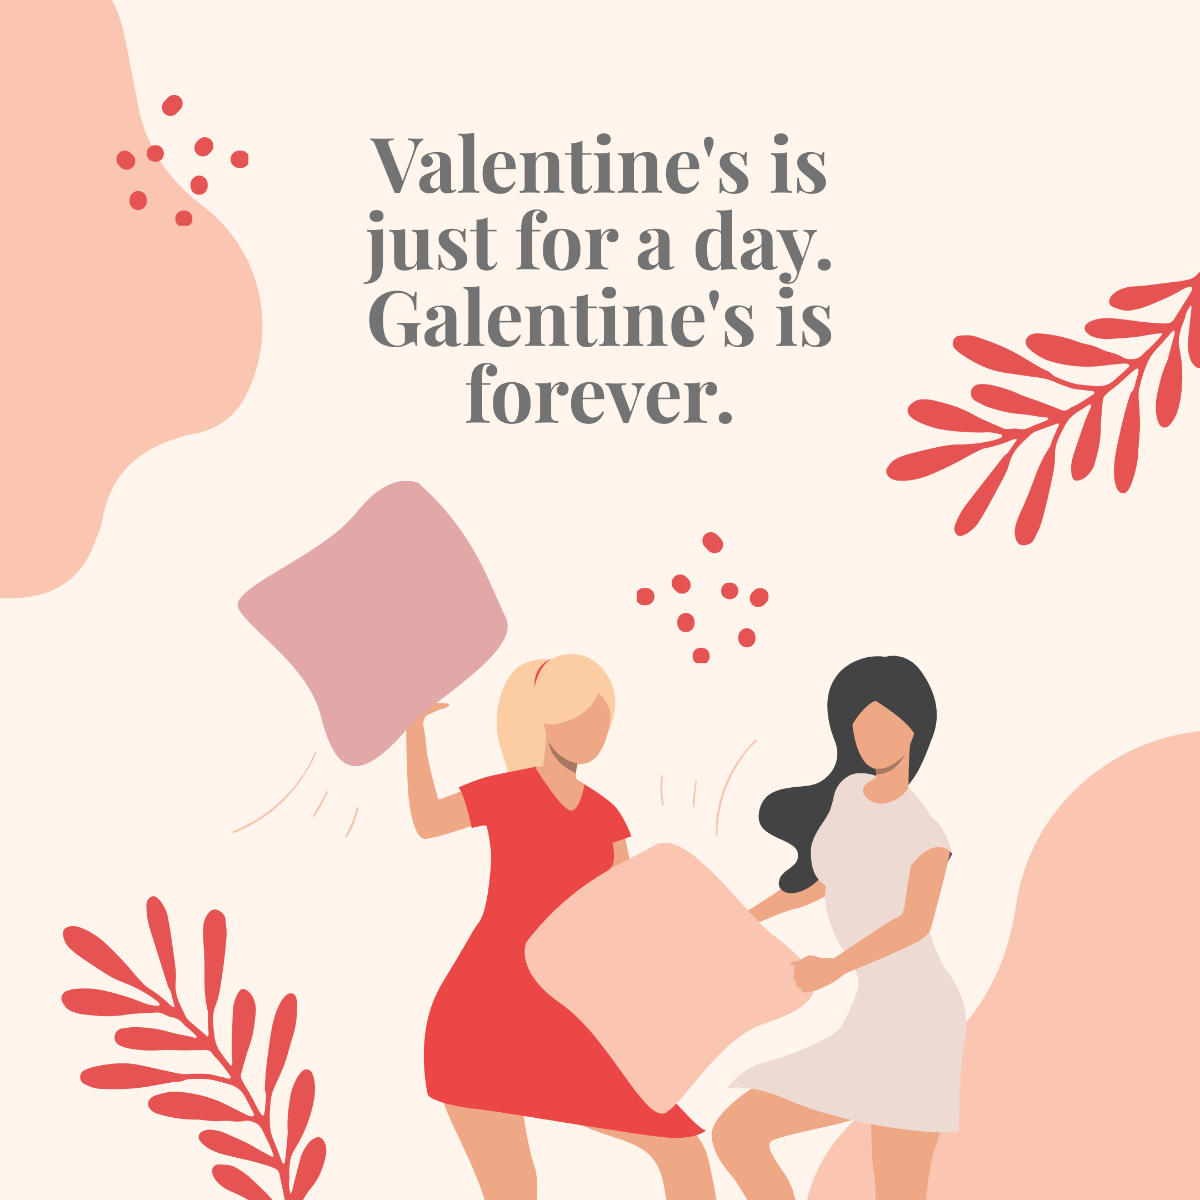 Funny Galentines Day Instagram Post